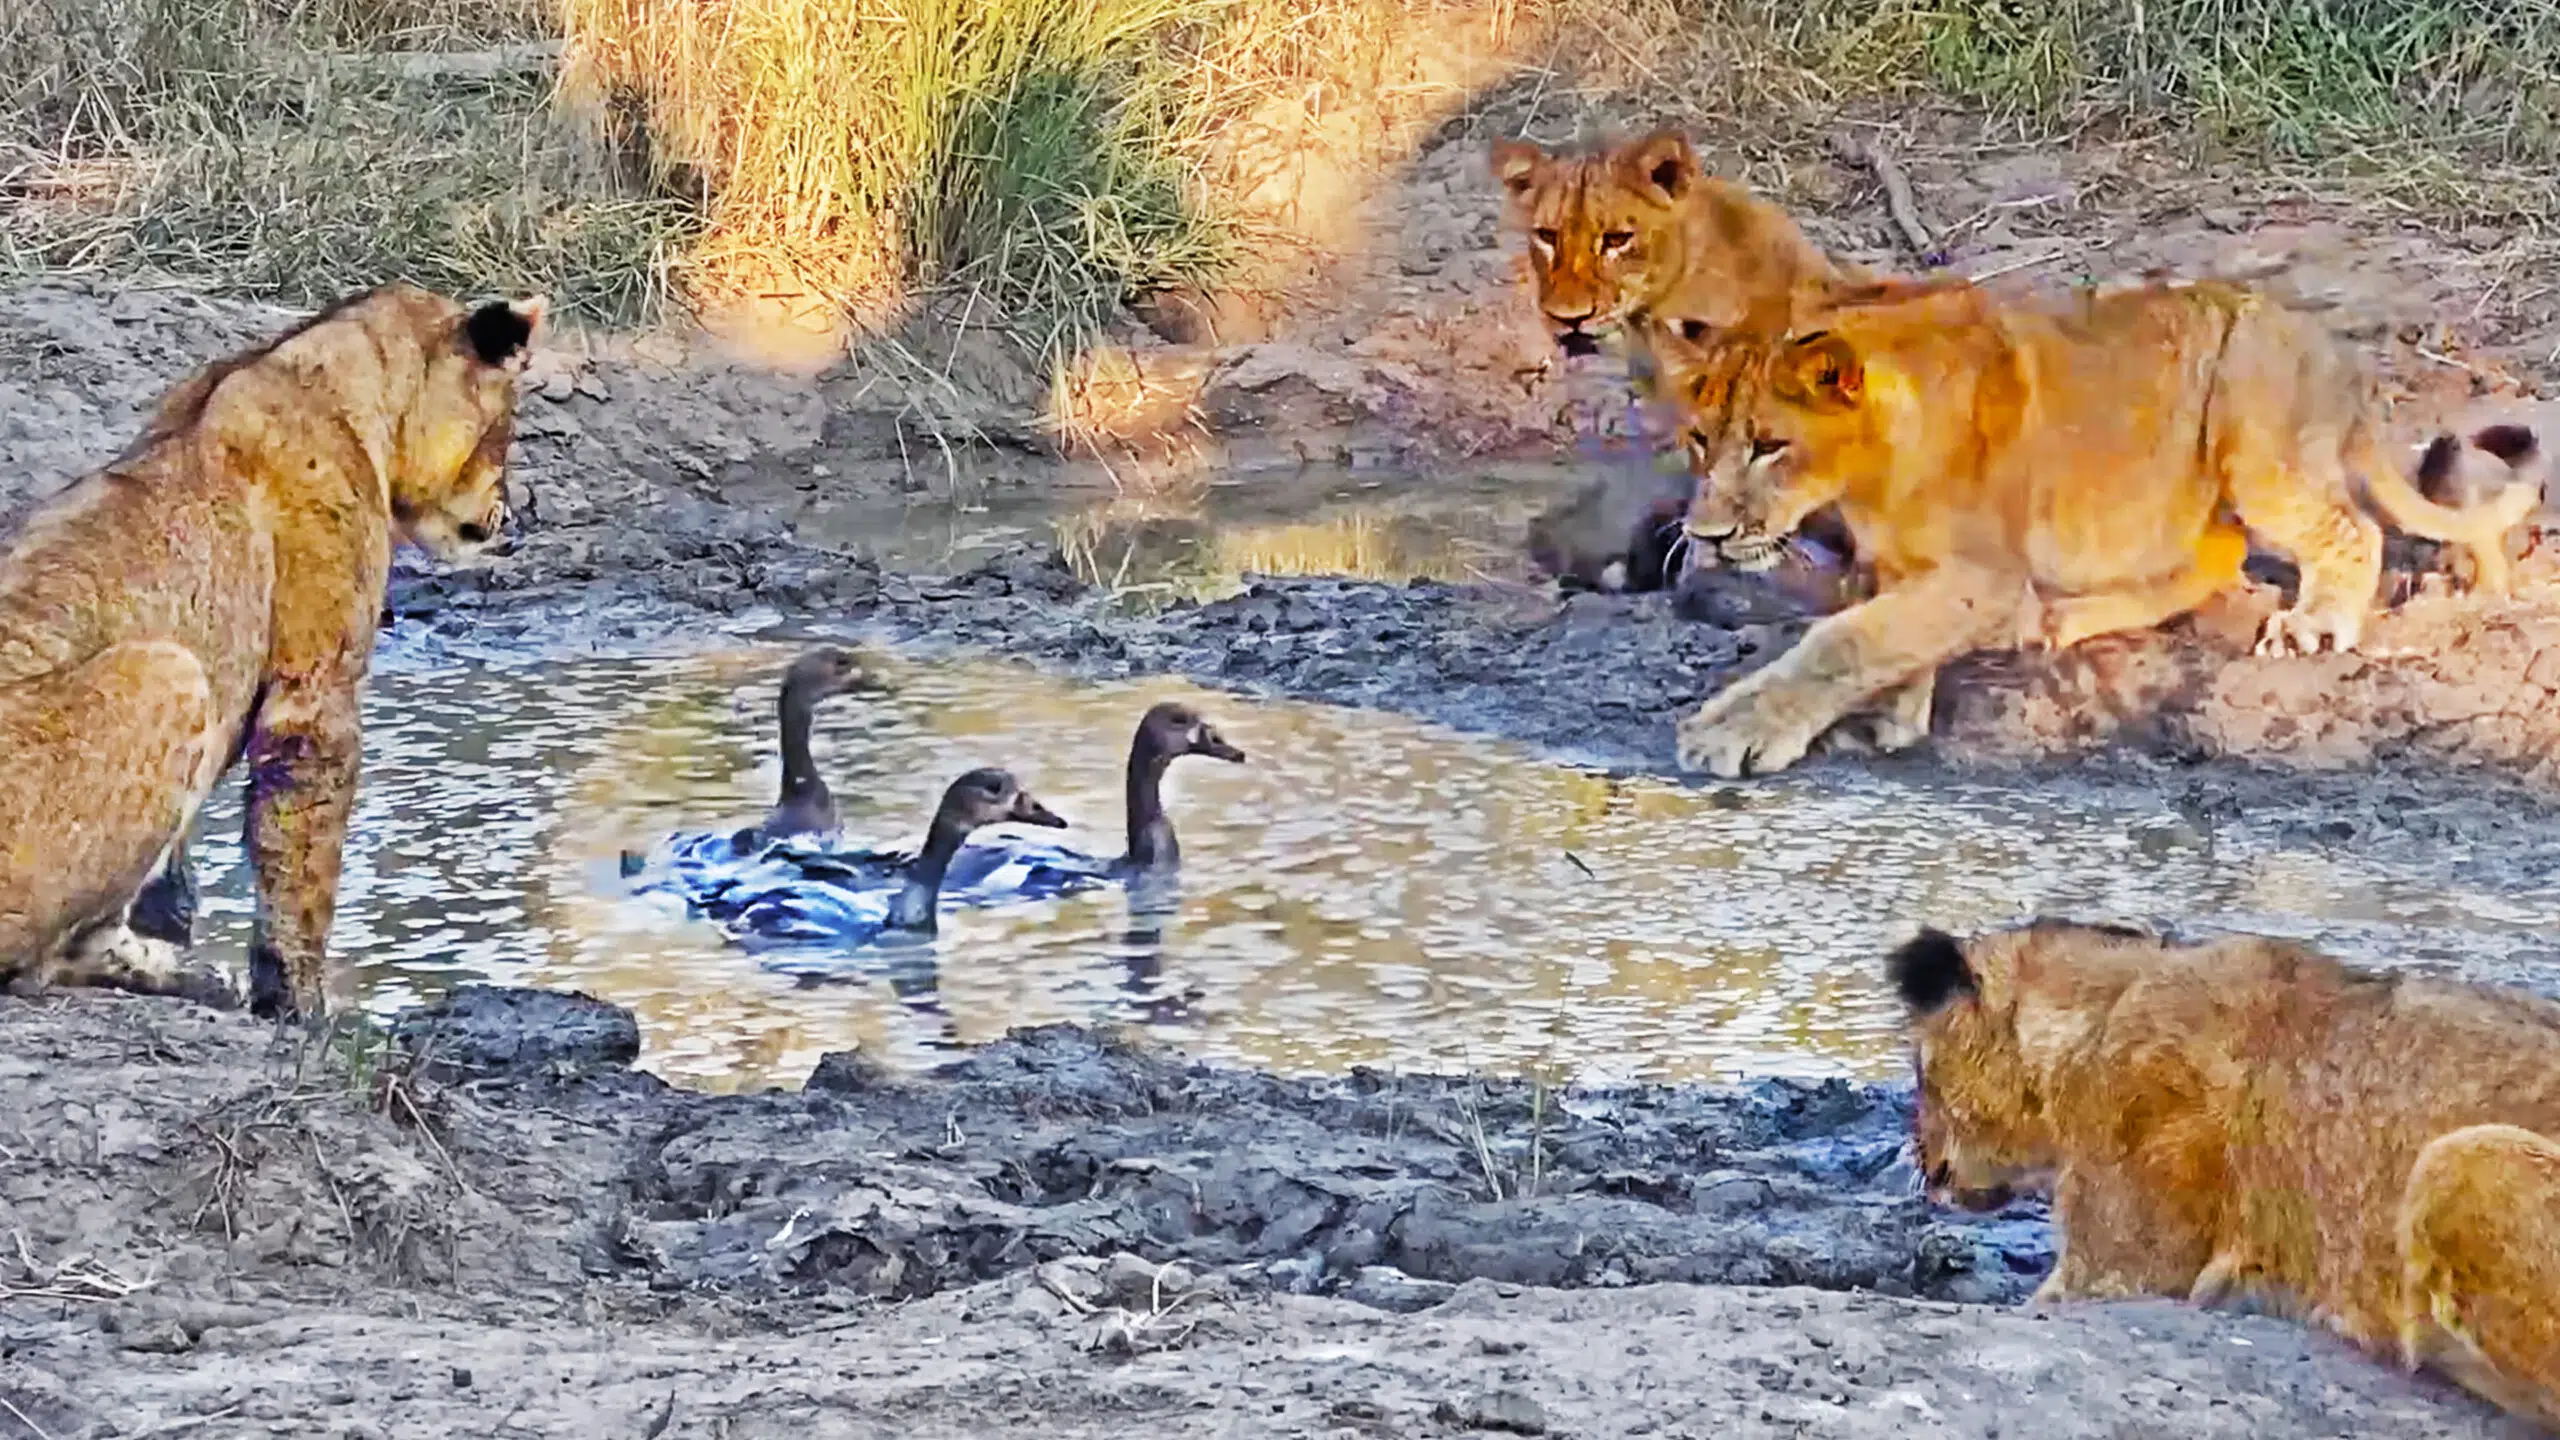 Lion Cubs Play Whack-a-mole With Geese